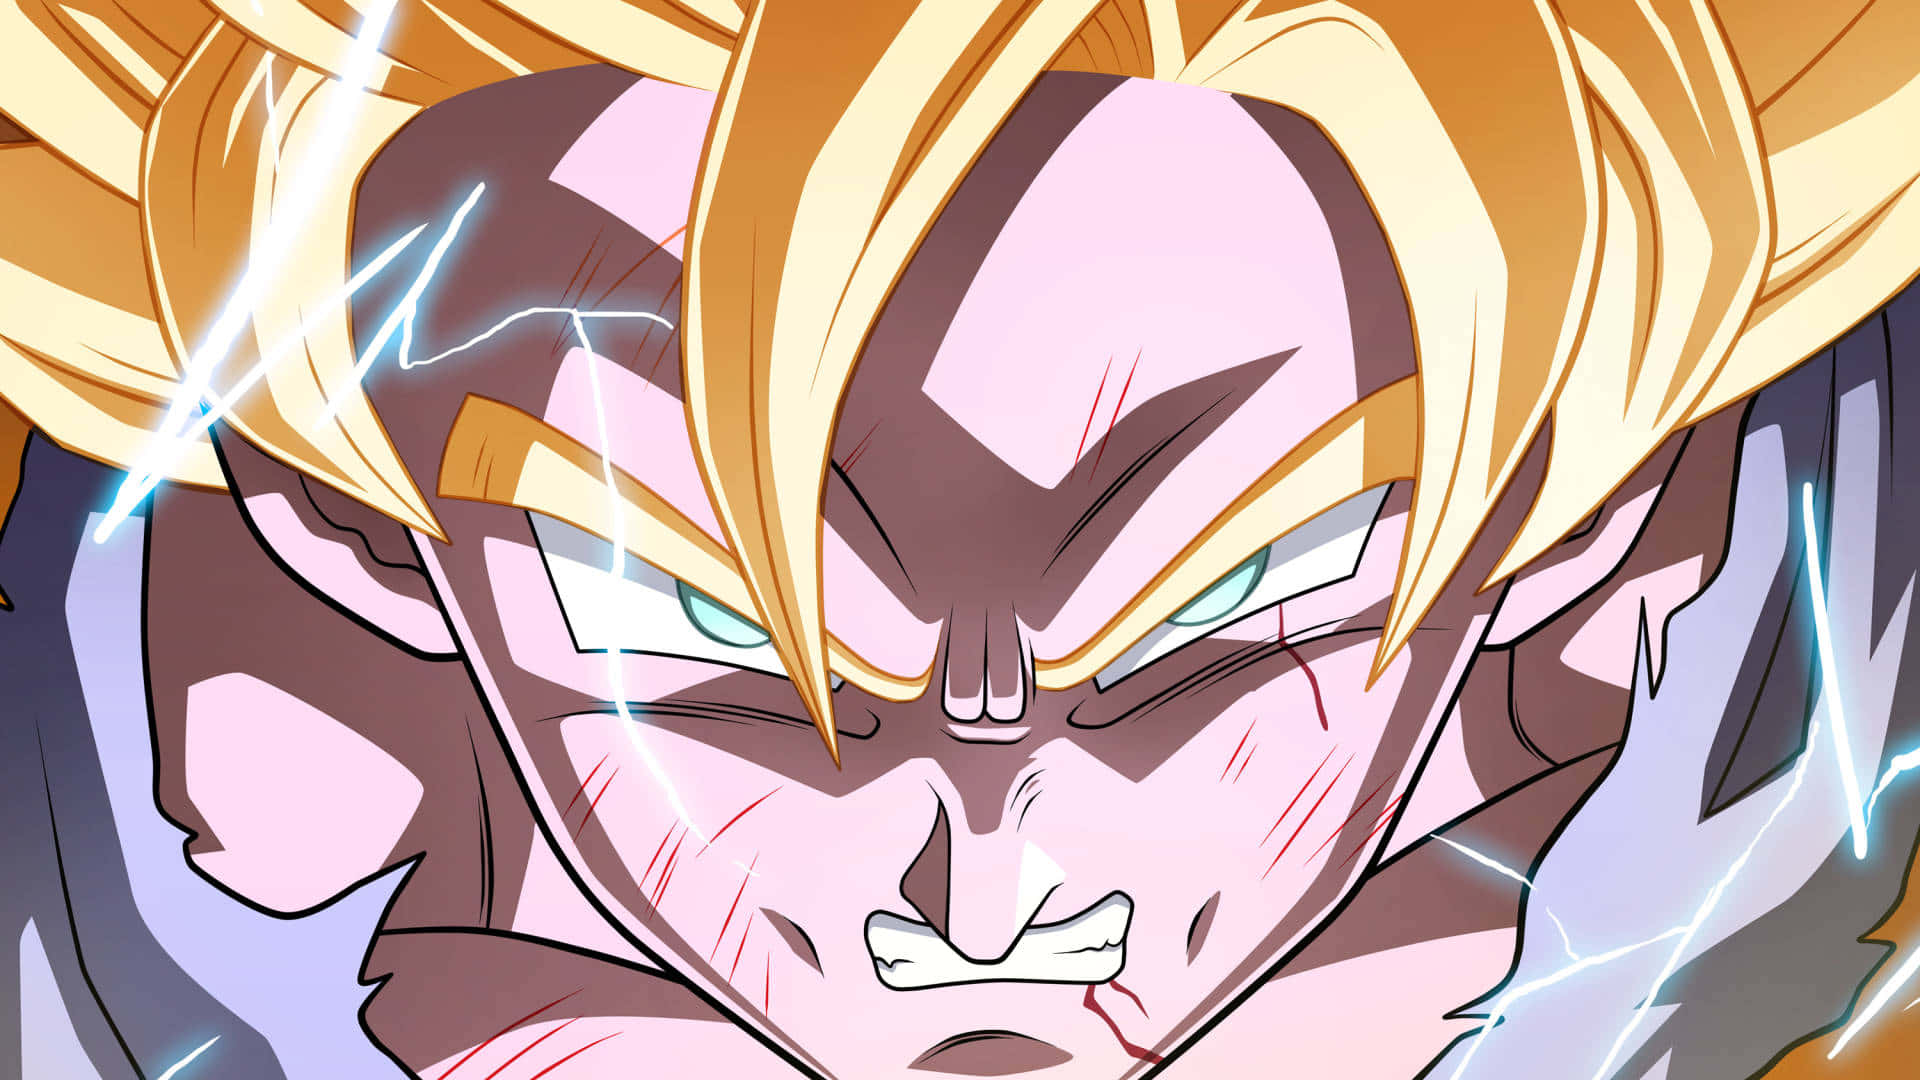 "Anger doesn't always make you powerful. But for Goku, it does!" Wallpaper